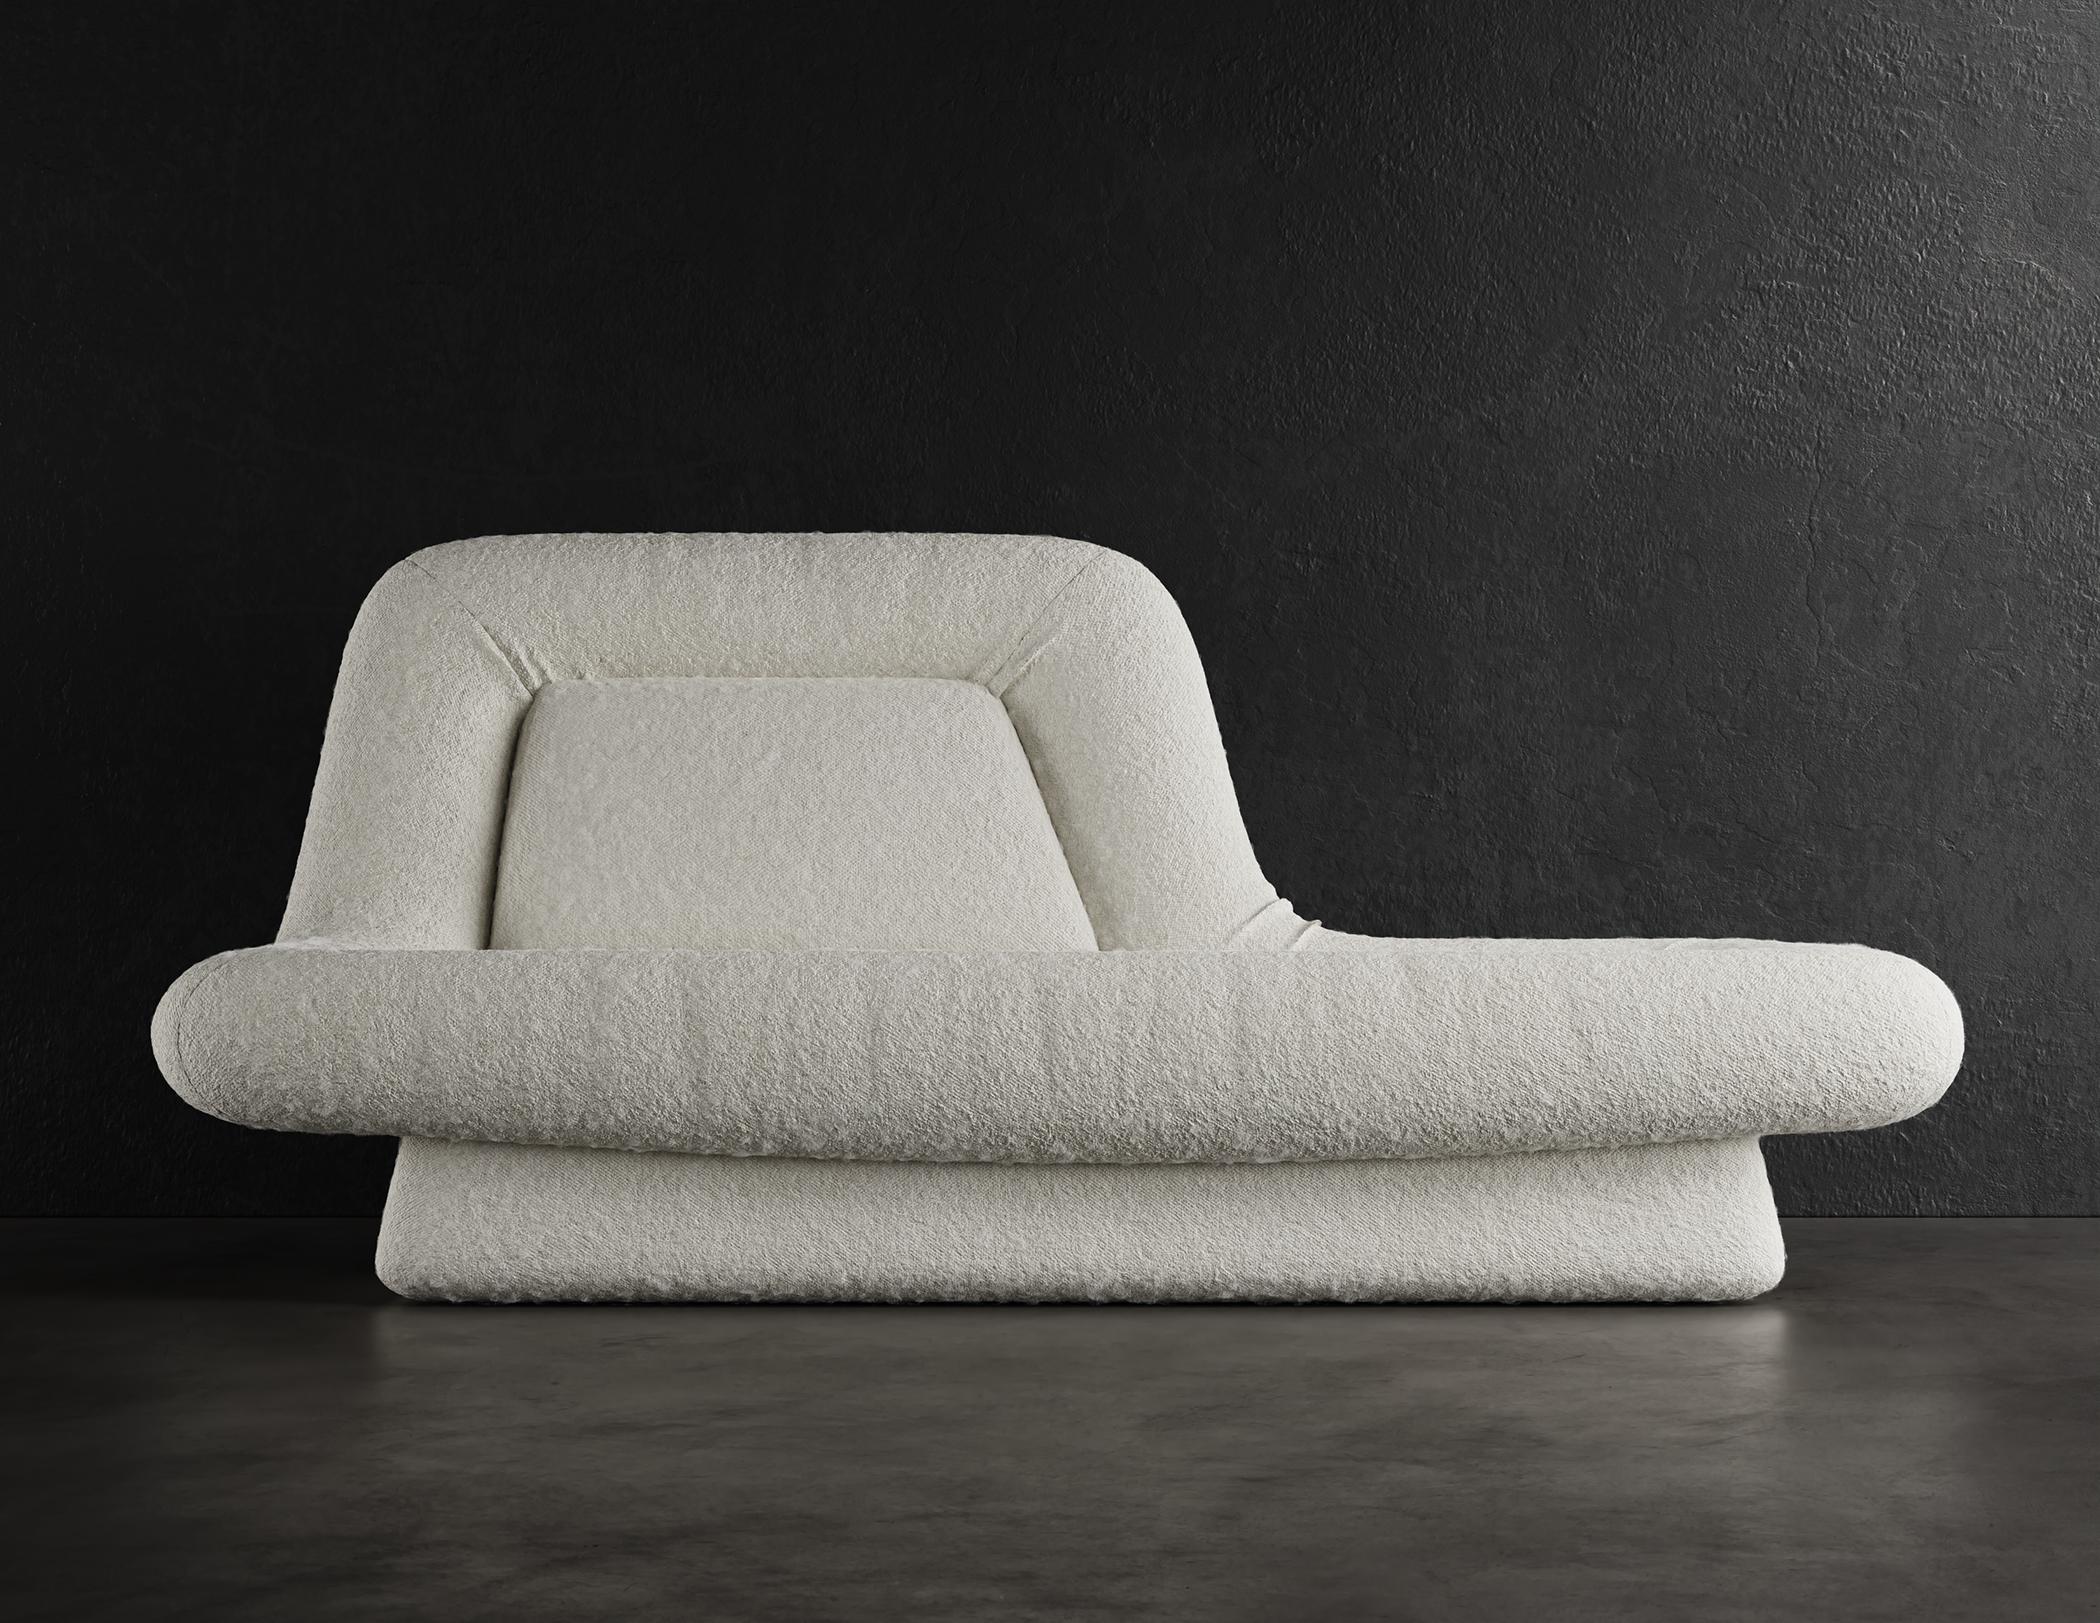 WAVE CHAISE LOUNGE - Modern Design in Cloud Boucle in Warm White In New Condition For Sale In Laguna Niguel, CA